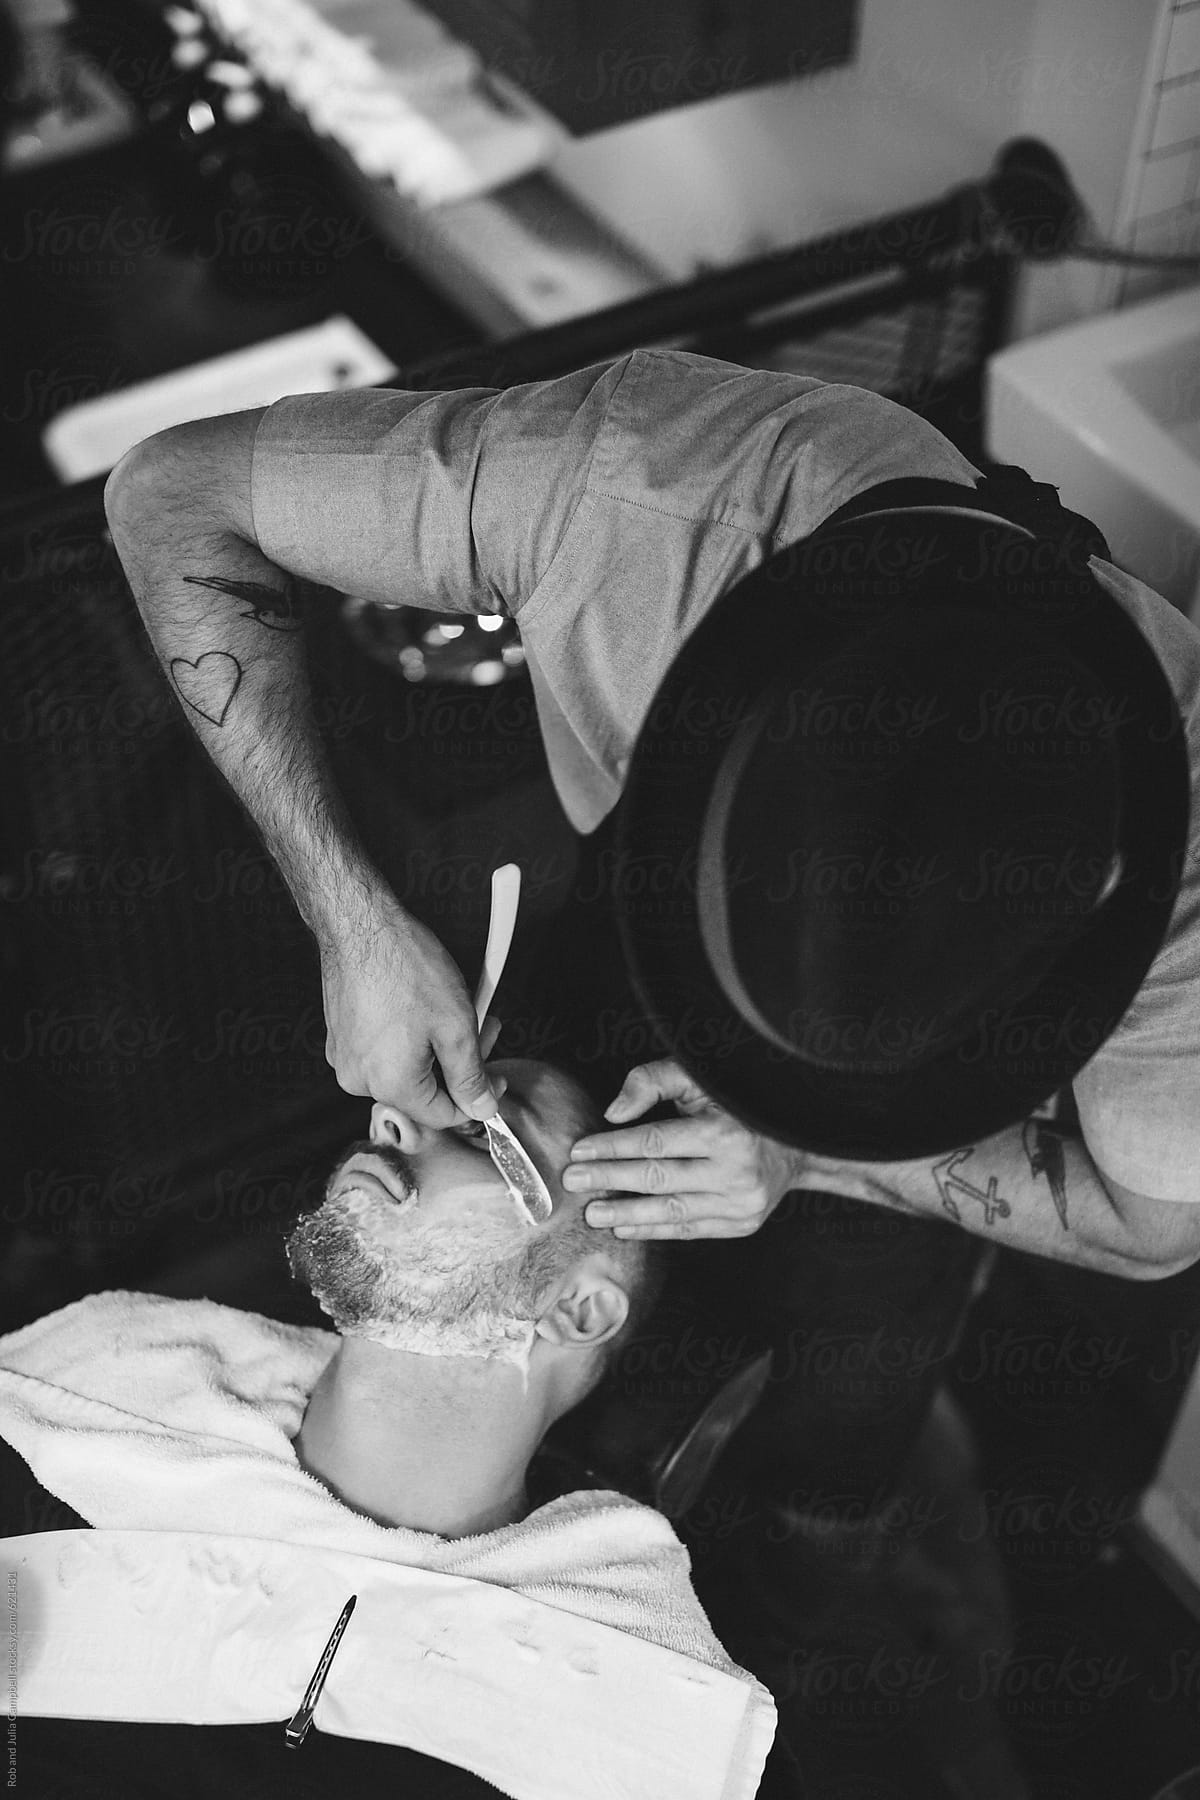 Hat-wearing barber giving man a classic hot lather shave - top view